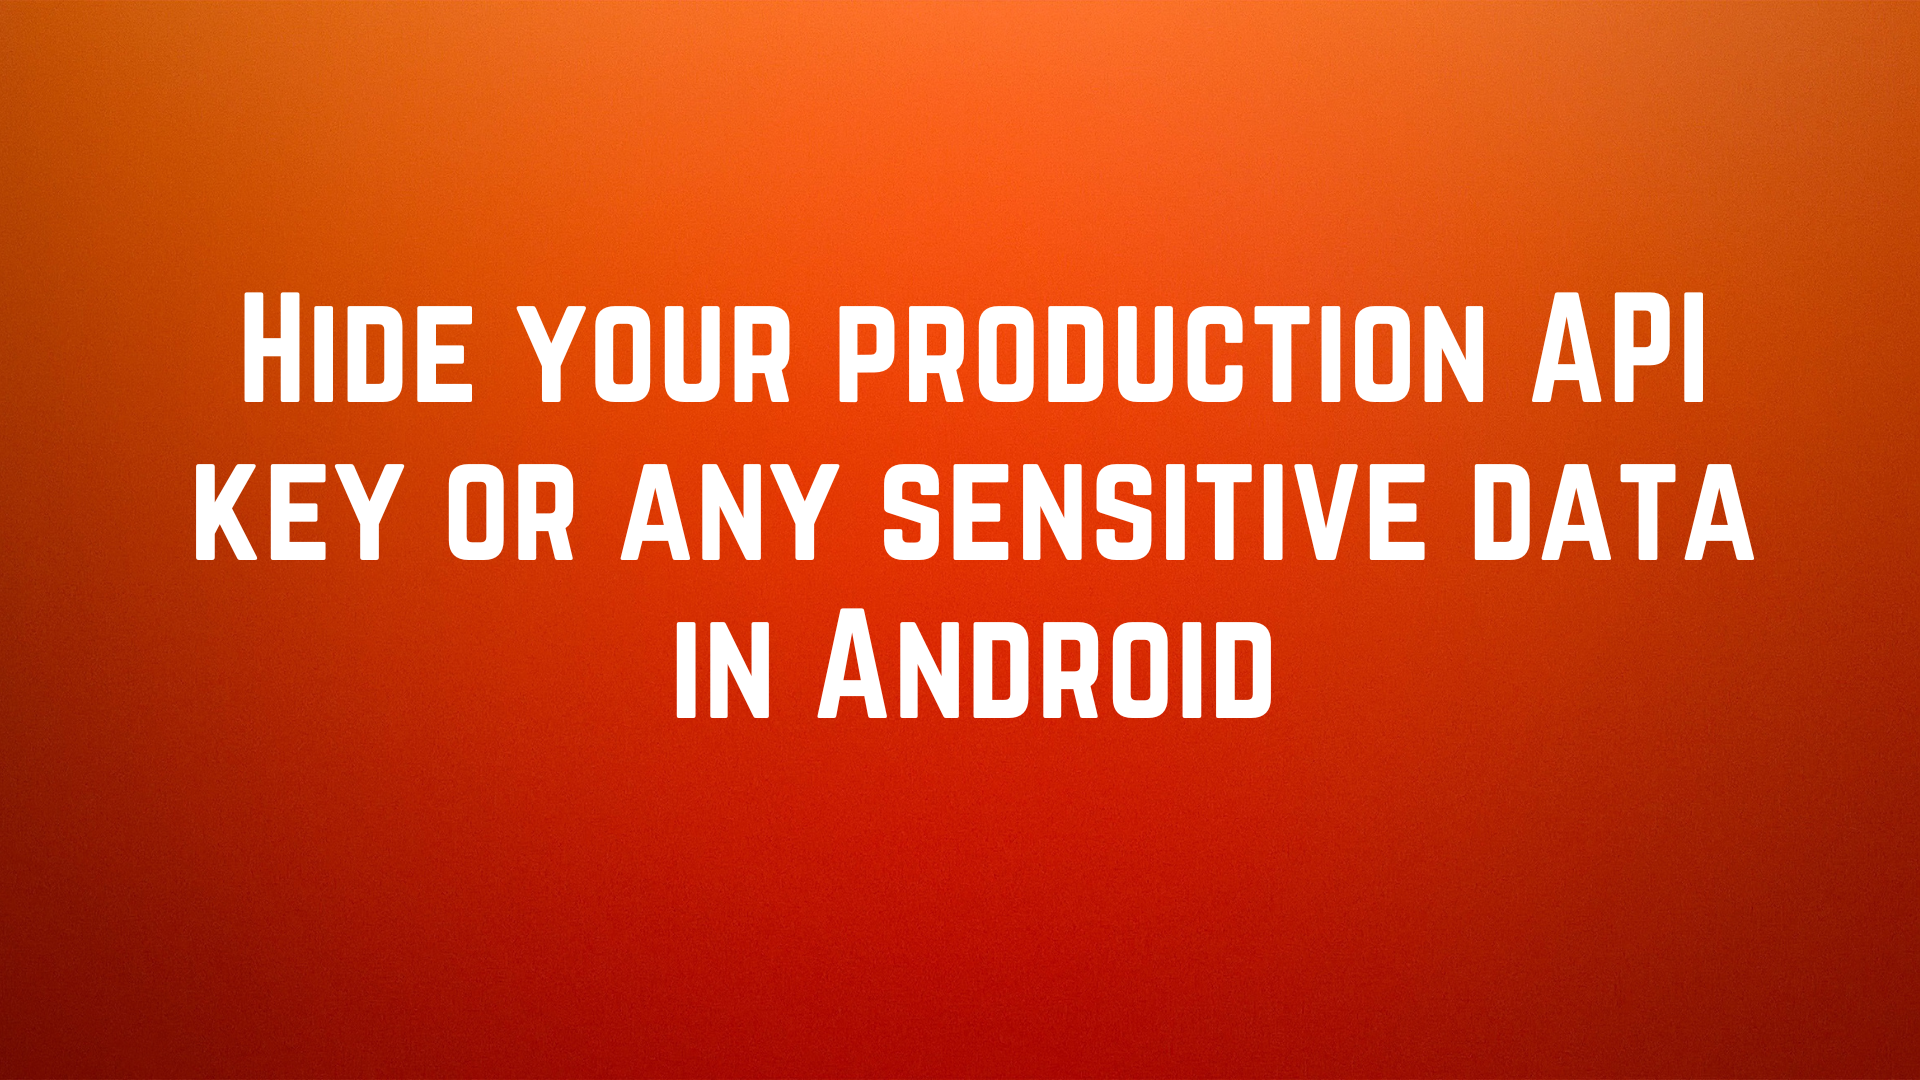 Hide your production API key or any sensitive data in Android